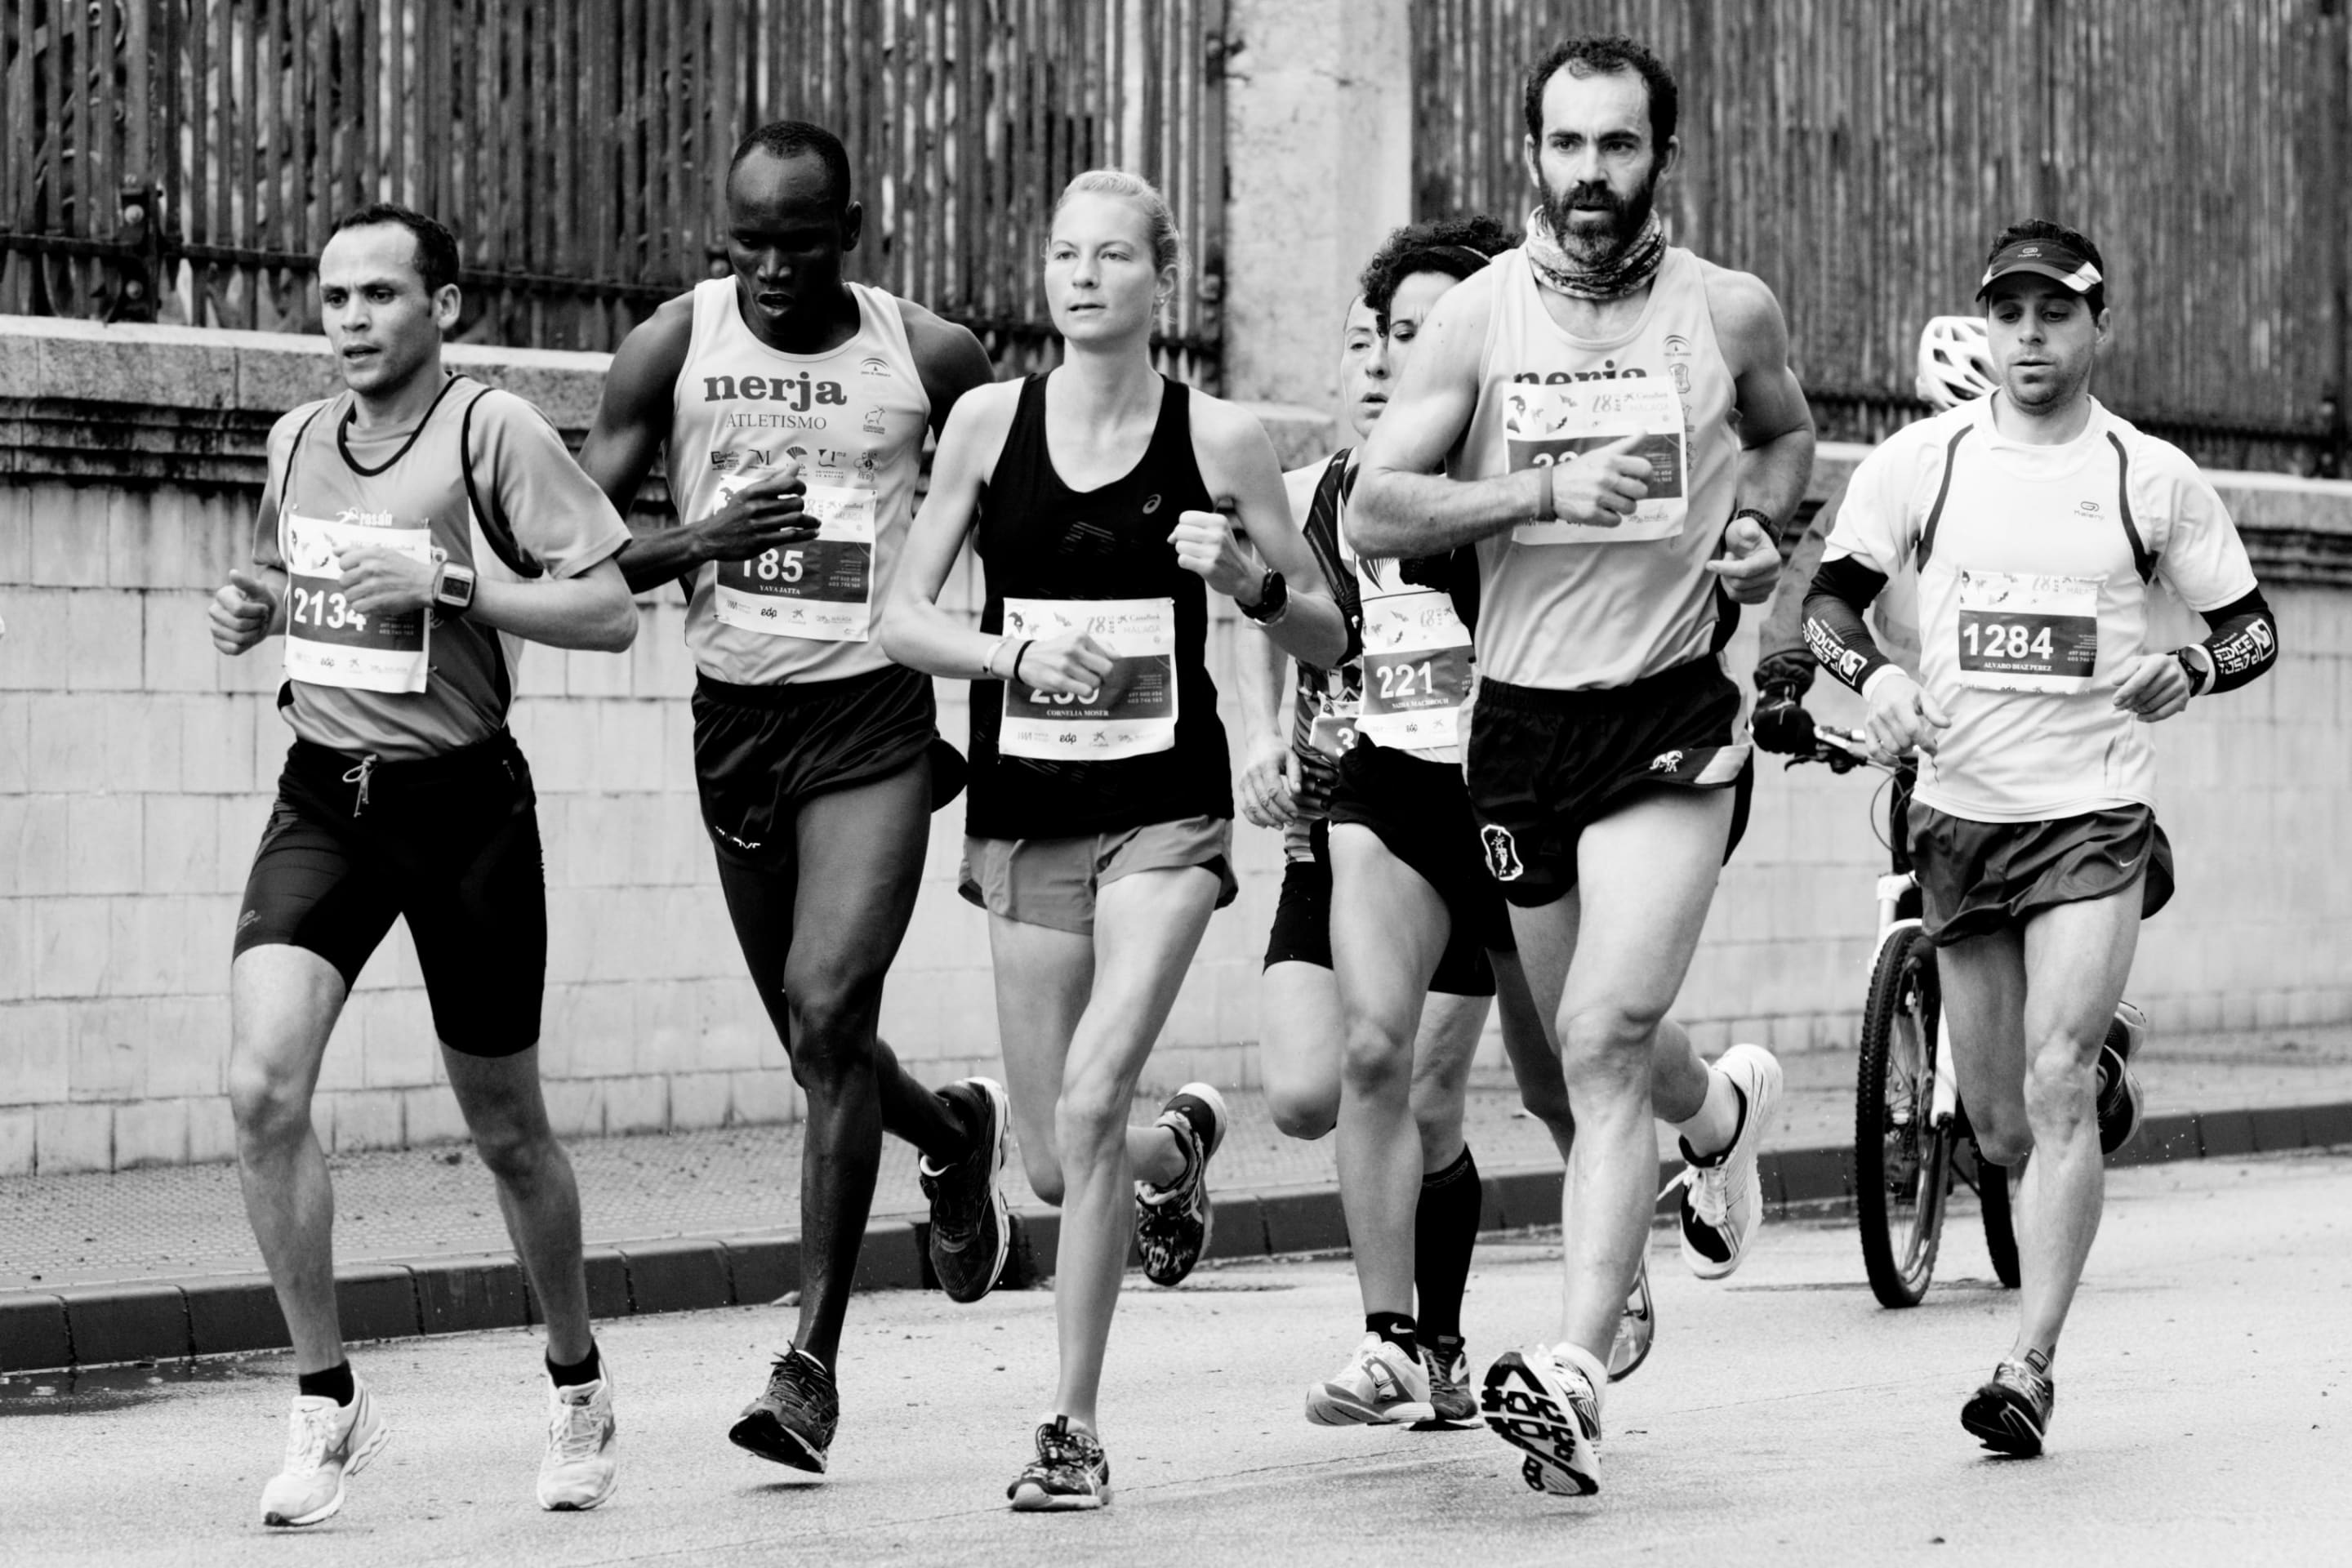 Black and white image of people running